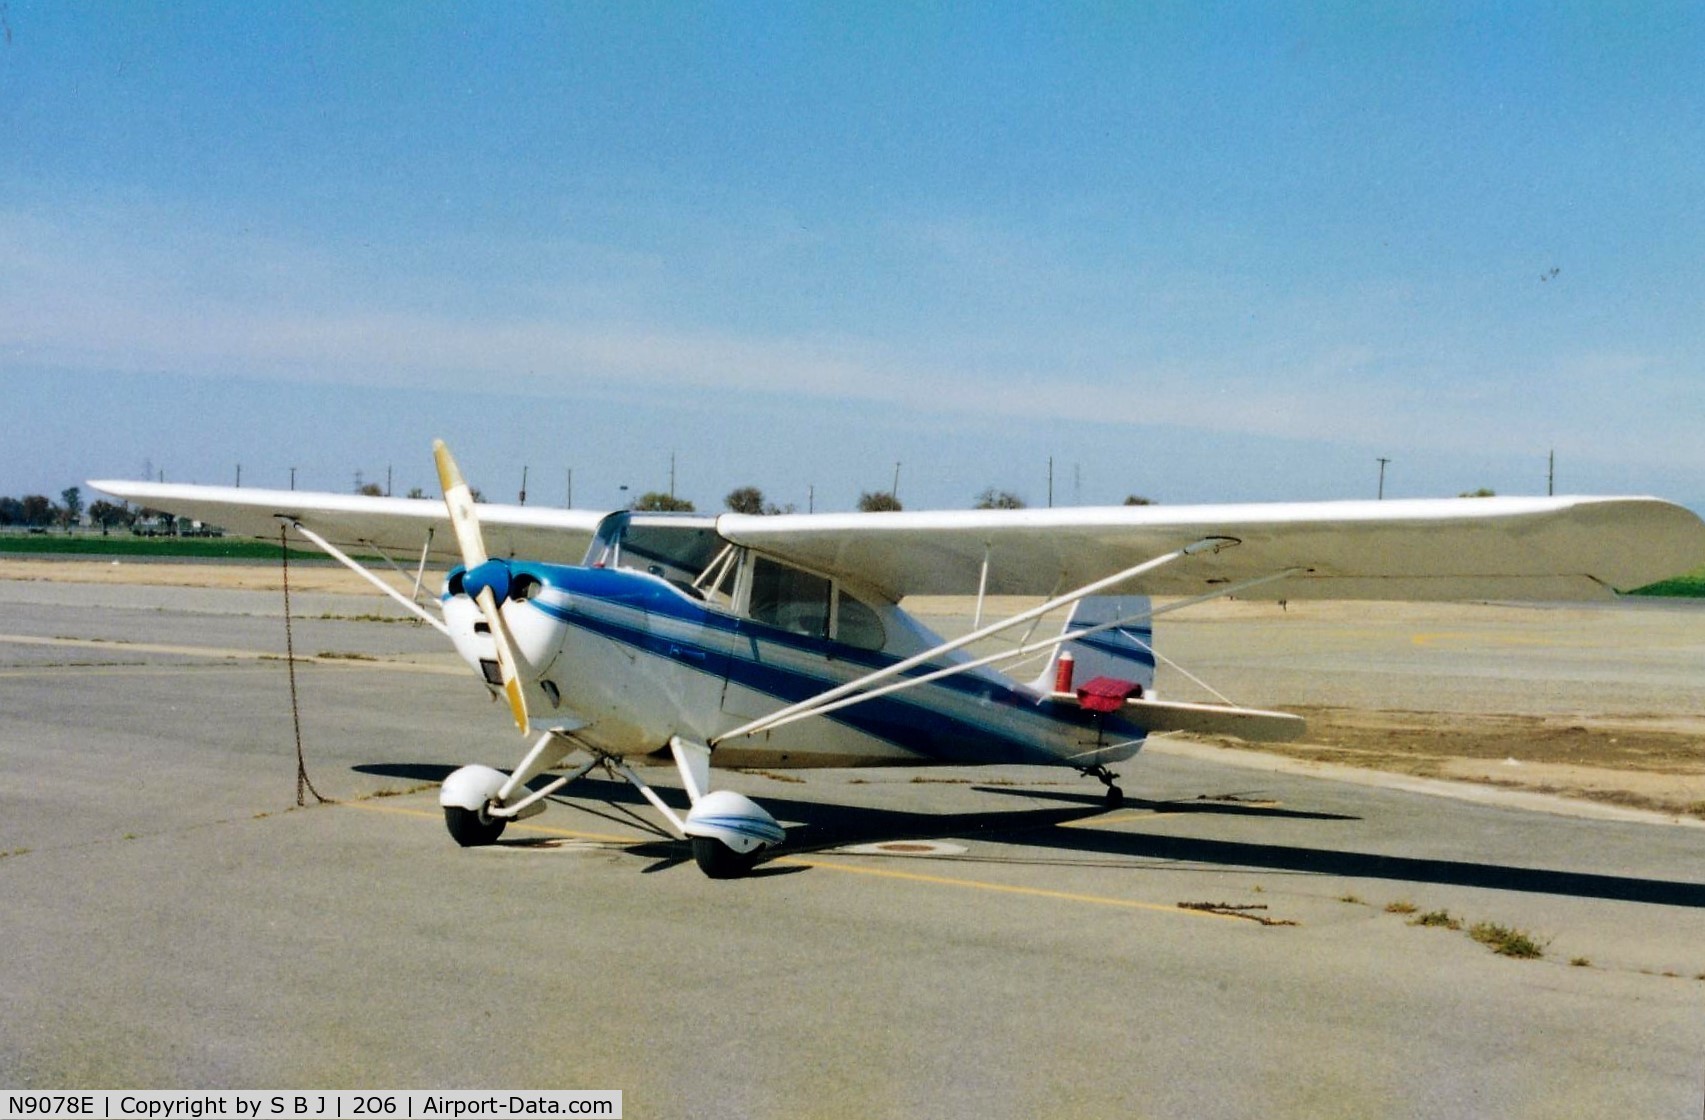 N9078E, 1946 Aeronca 11AC Chief C/N 11AC-710, 78E with a coffee stop at the Chowchilla airport. The thermas (seen on the tail) was always on my preflight checklist.